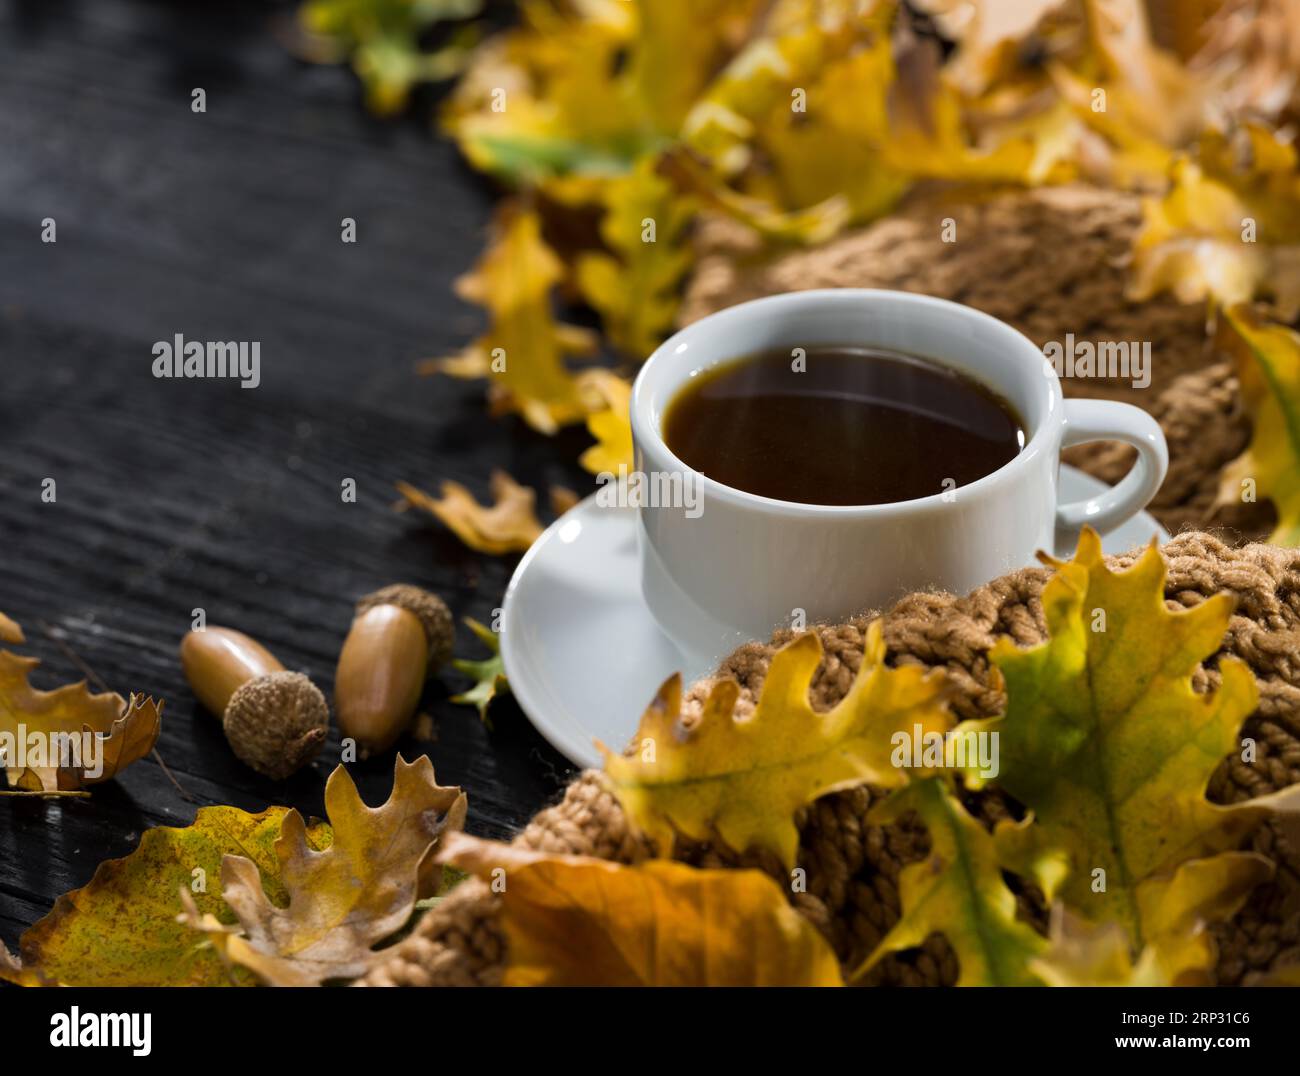 Hot coffee and autumn leaves. Modern coffee mug on black table with autumn coffee concept. Stock Photo